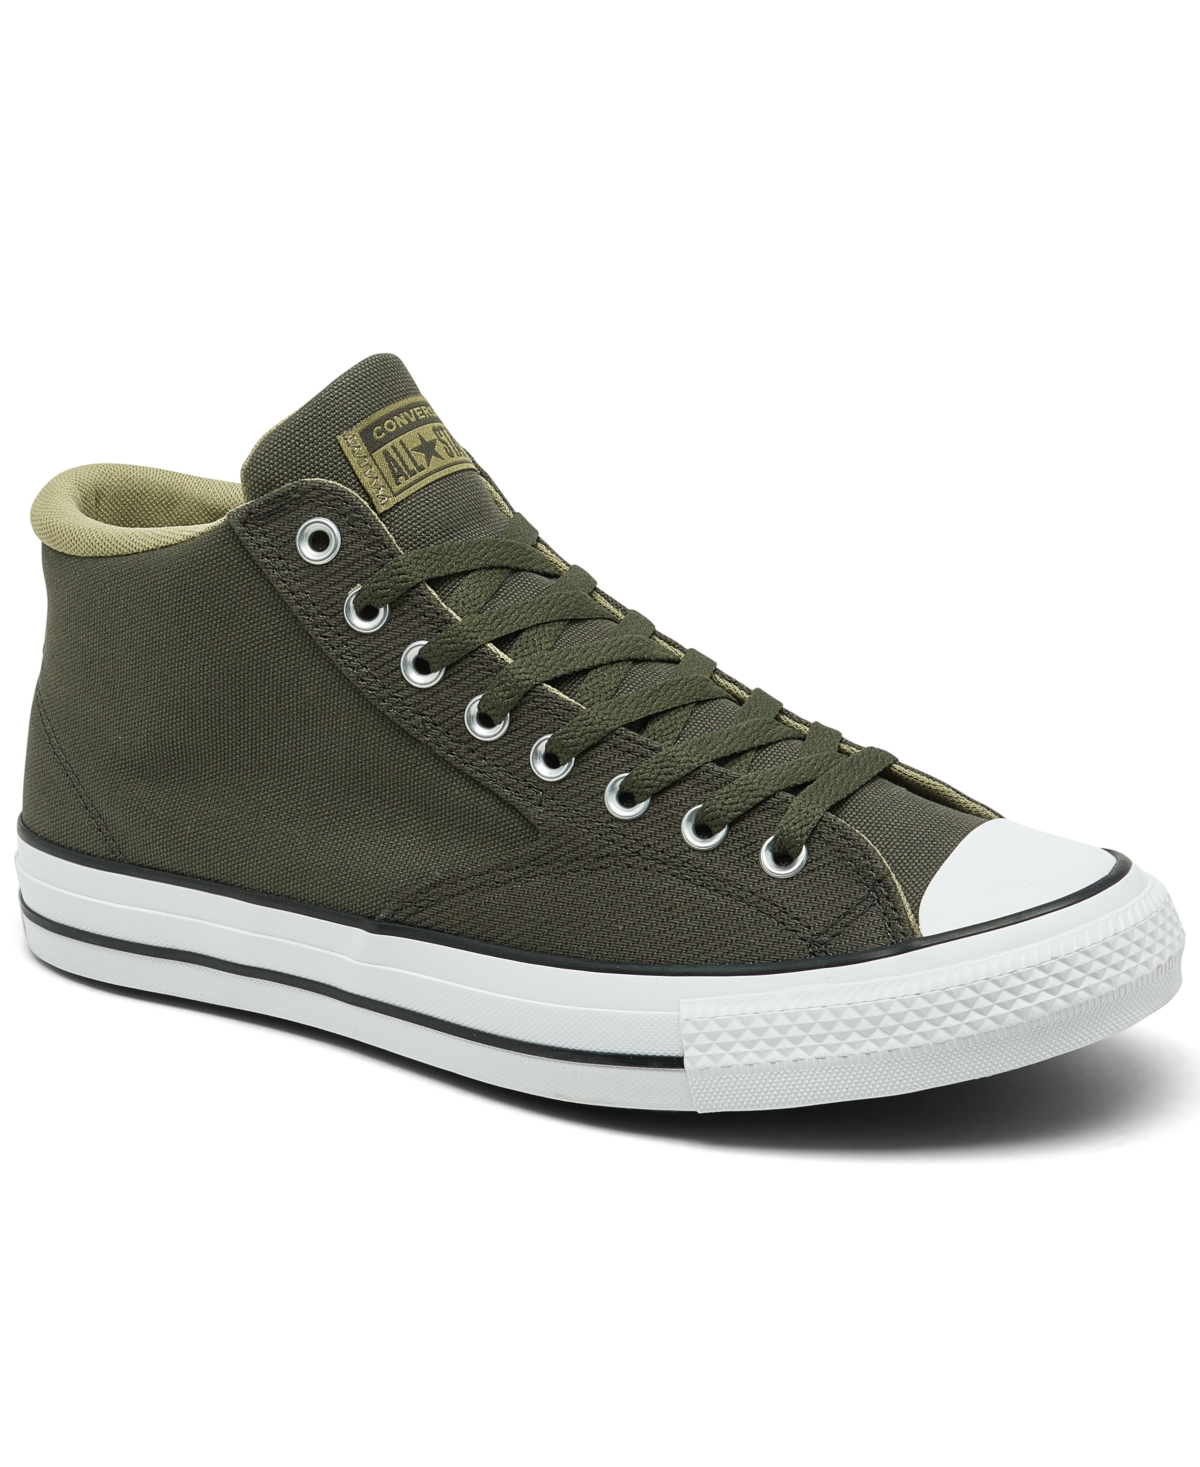 Converse Men's Chuck Taylor All Star Malden Street Casual Sneakers From Finish Line In Cave Green,mossy Green